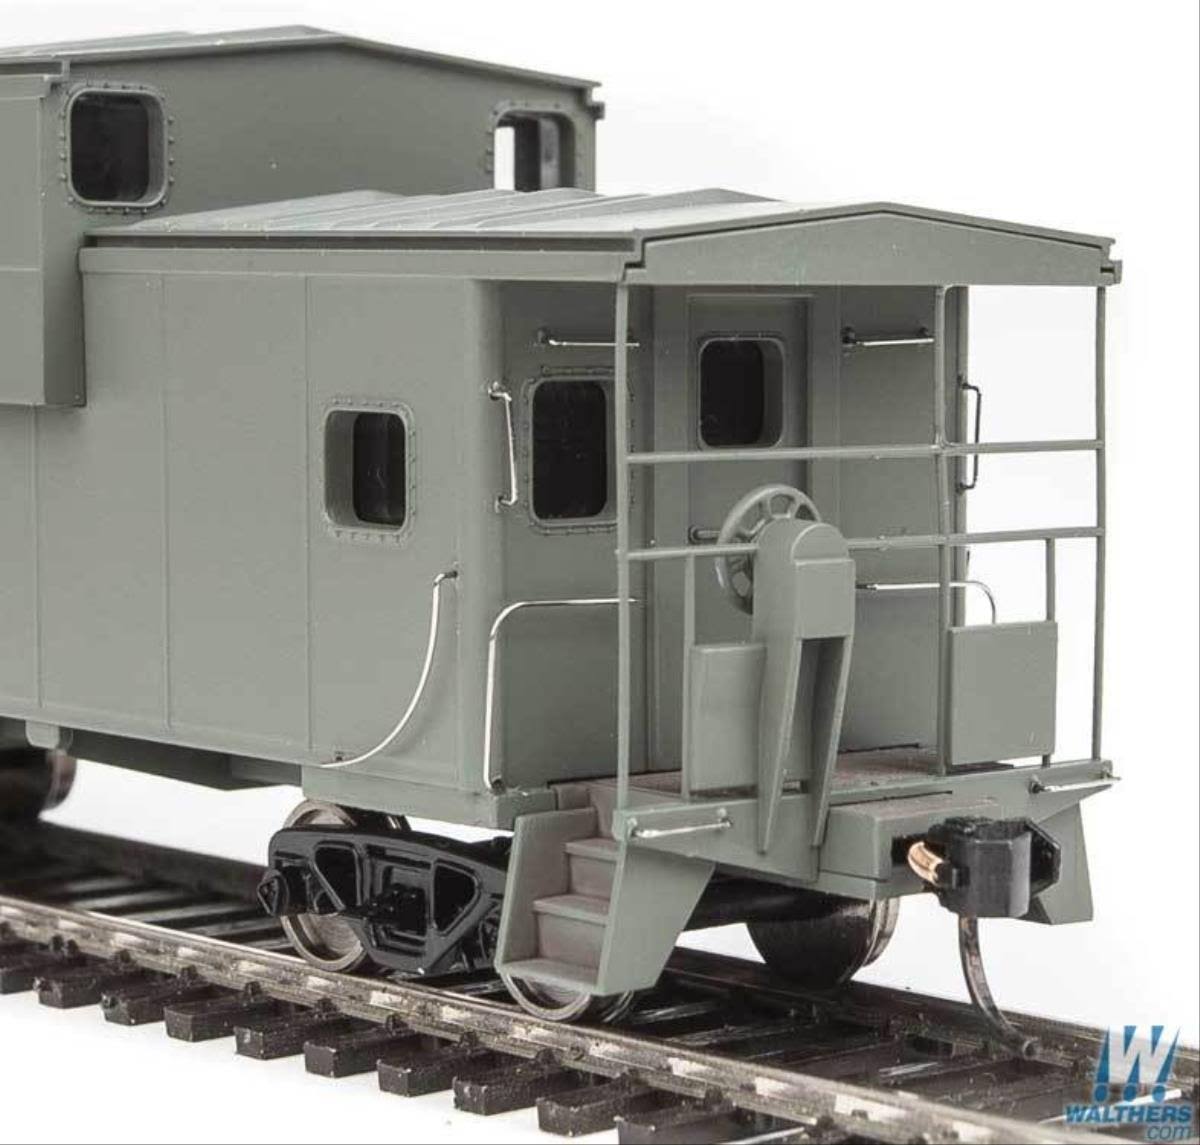 Walthers Mainline 201 HO Scale Caboose Detail Kit